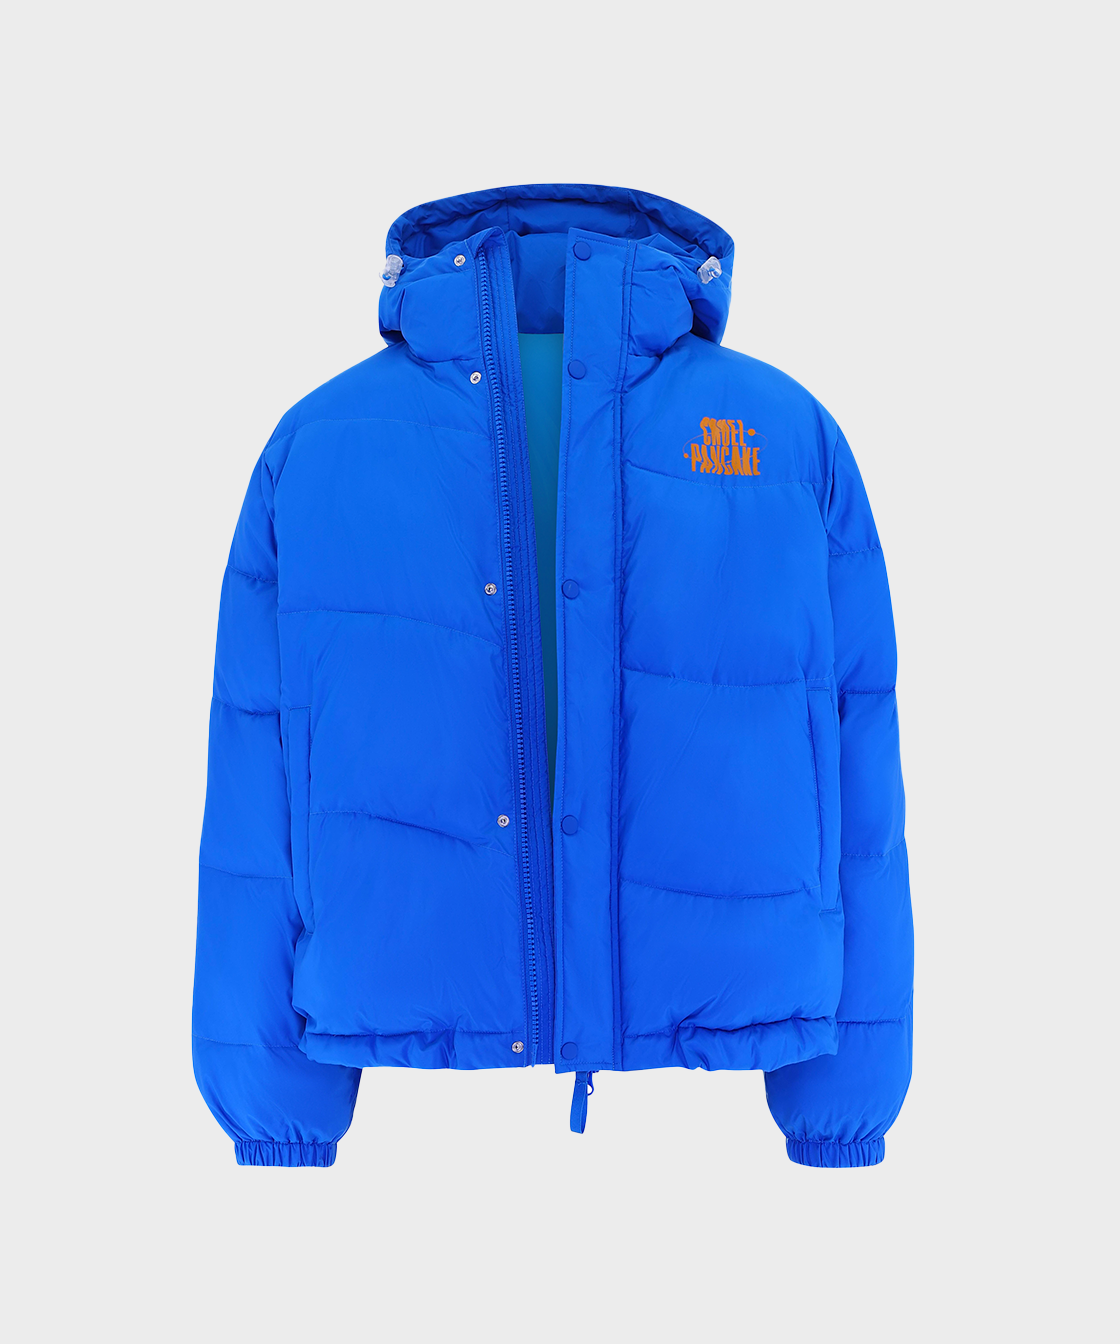 If you don't stand puffer jacket - blue